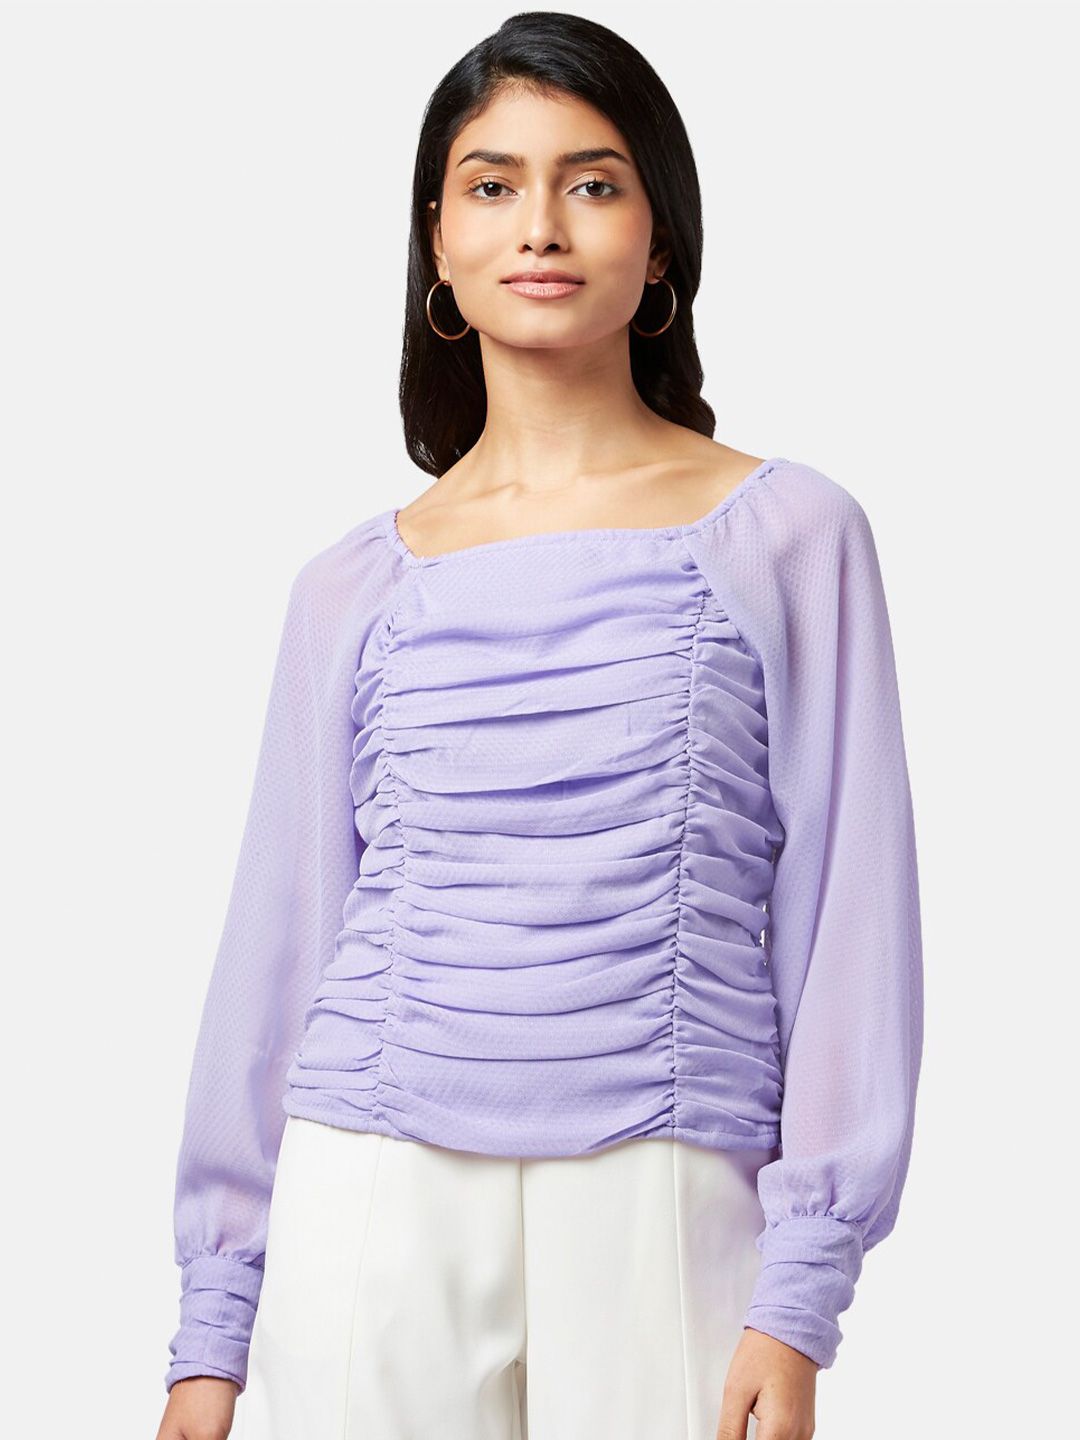 Honey by Pantaloons Women Cuffed Sleeves Lavender Top Price in India